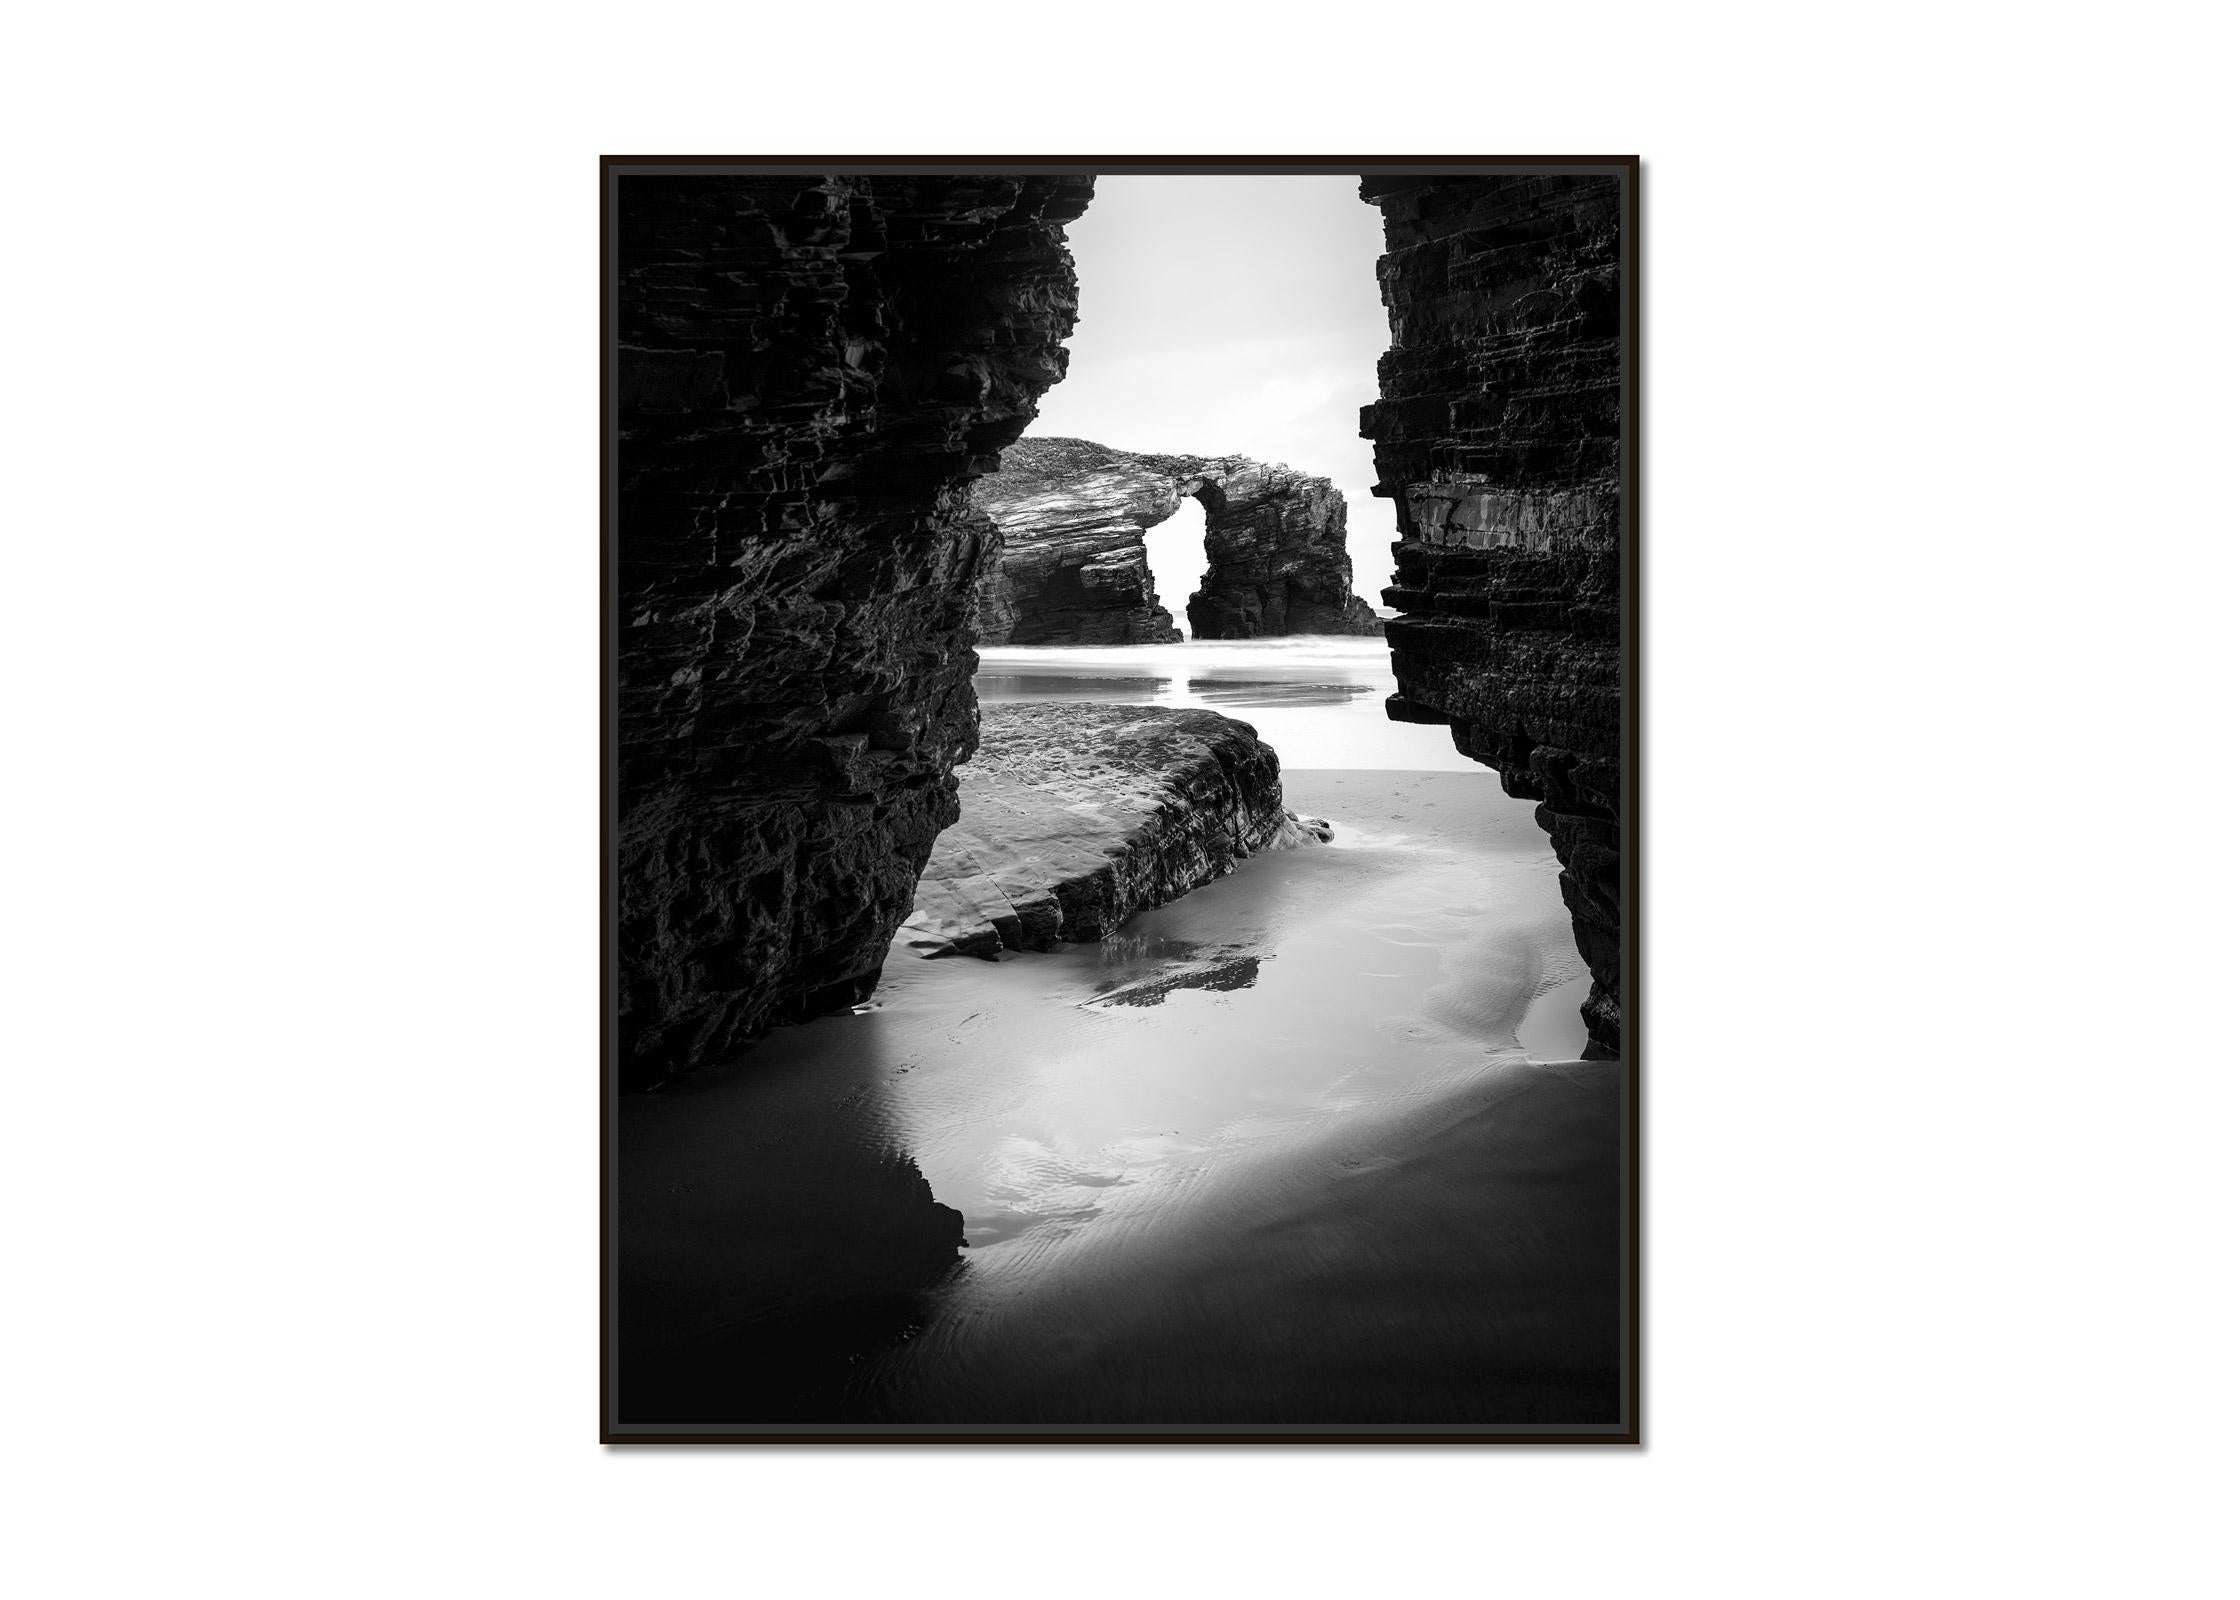 Arches on Catedrais, beach, rocks, Galicia, Spain, black and white landscape  - Photograph by Gerald Berghammer